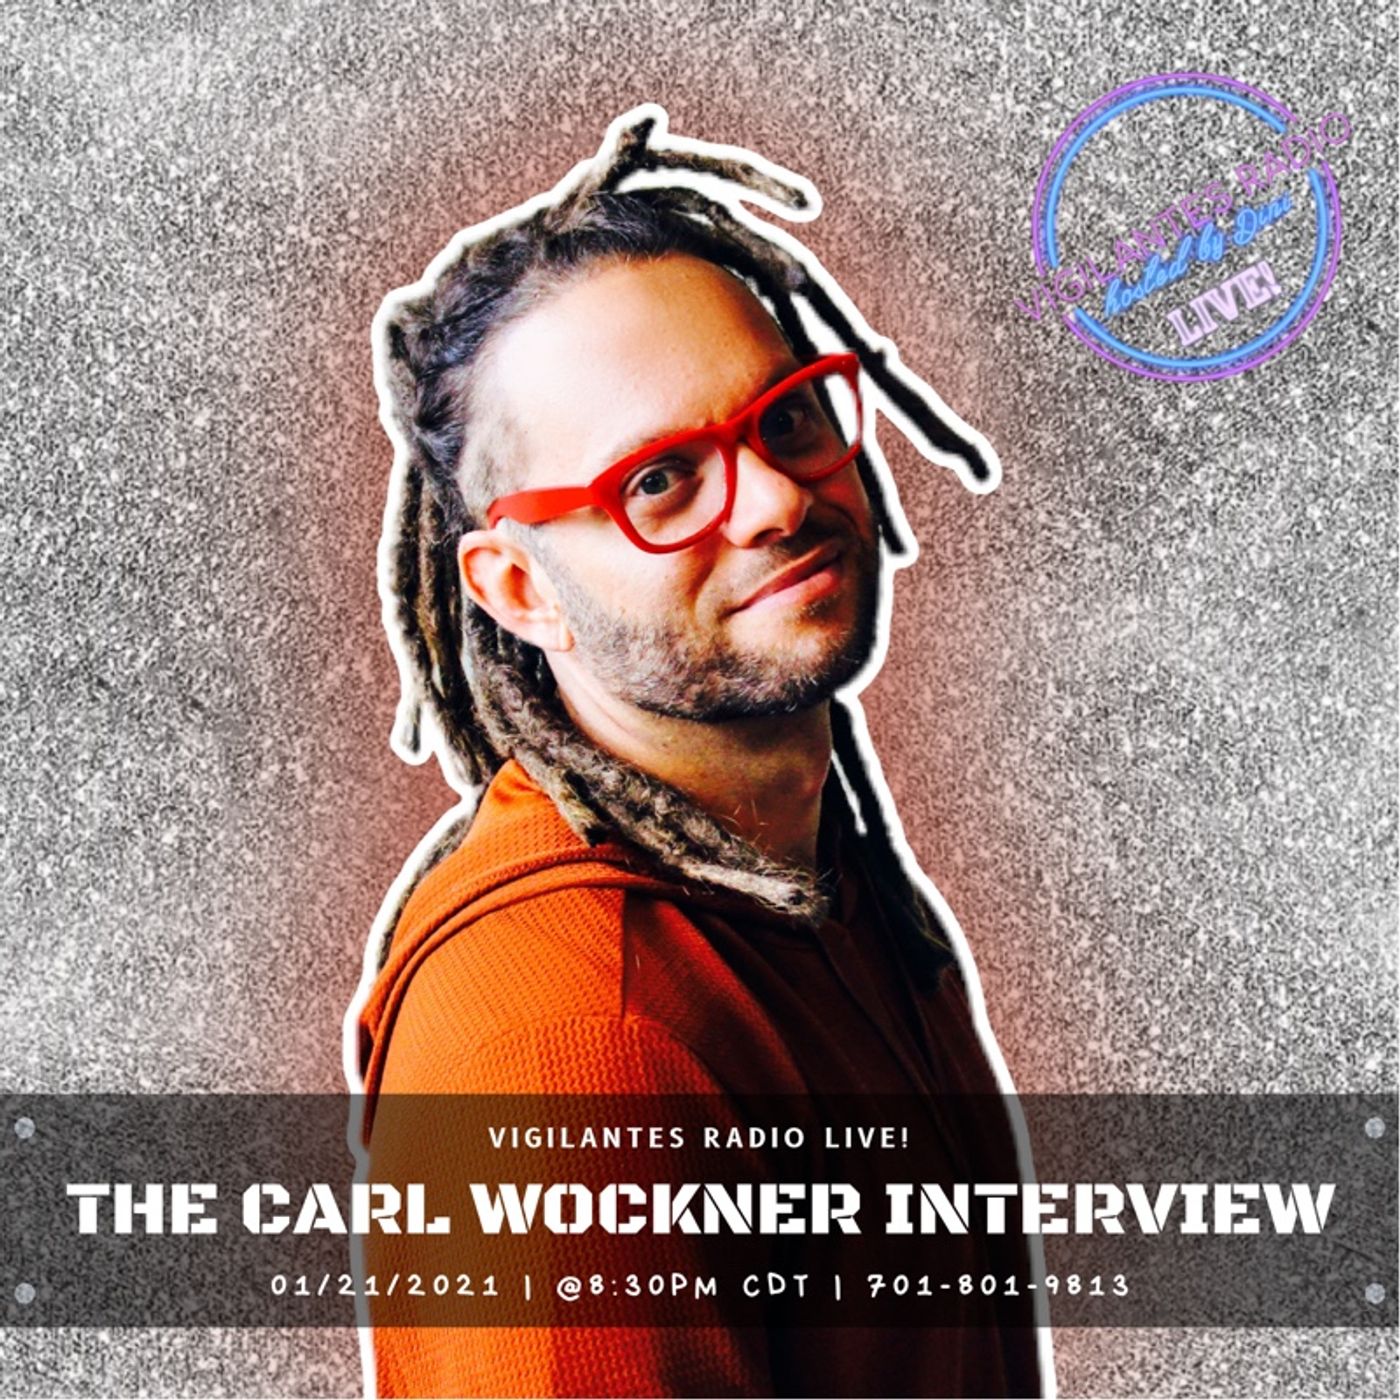 The Carl Wockner Interview. Image